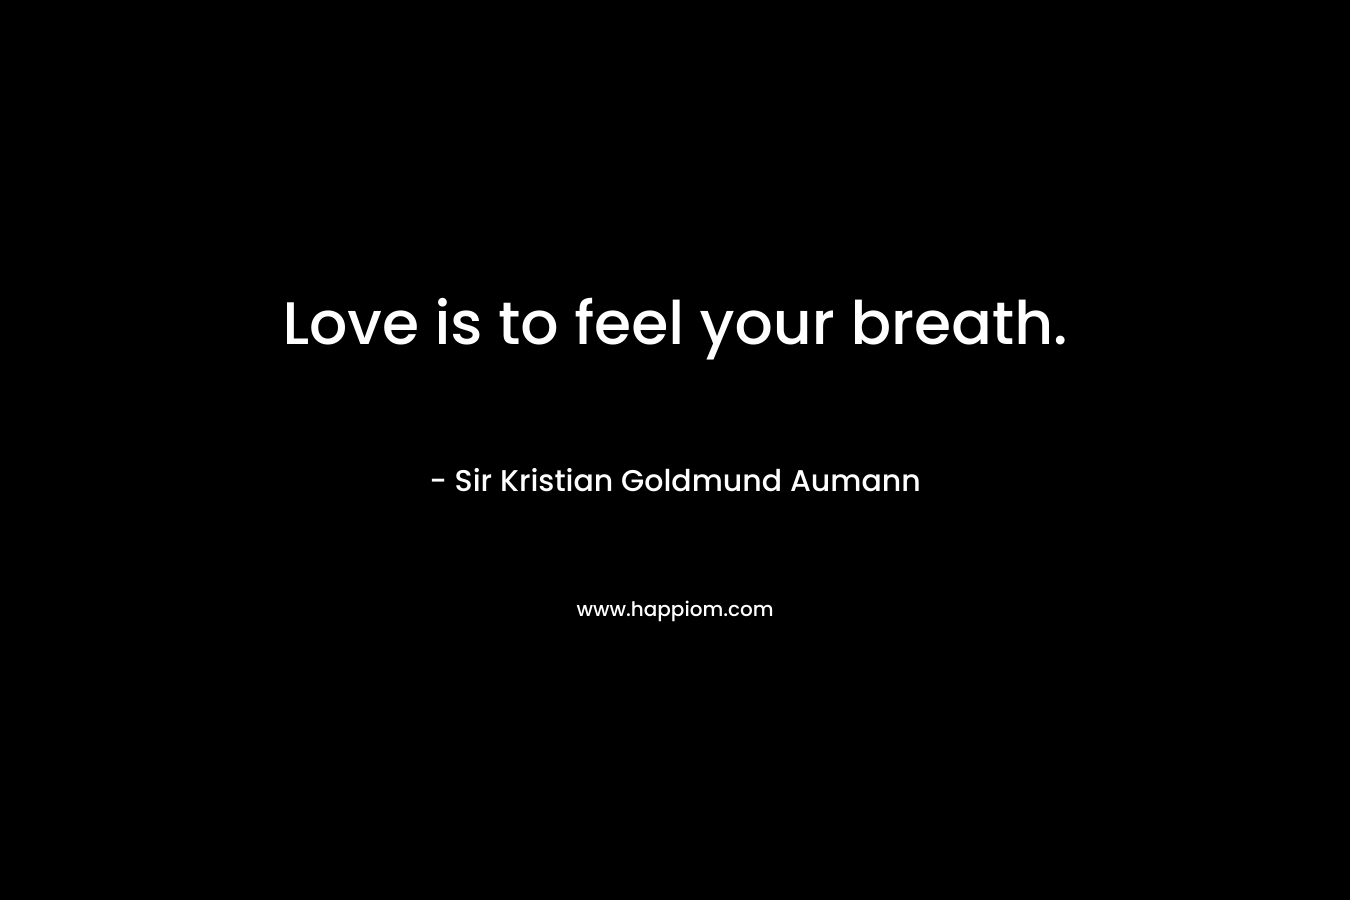 Love is to feel your breath.